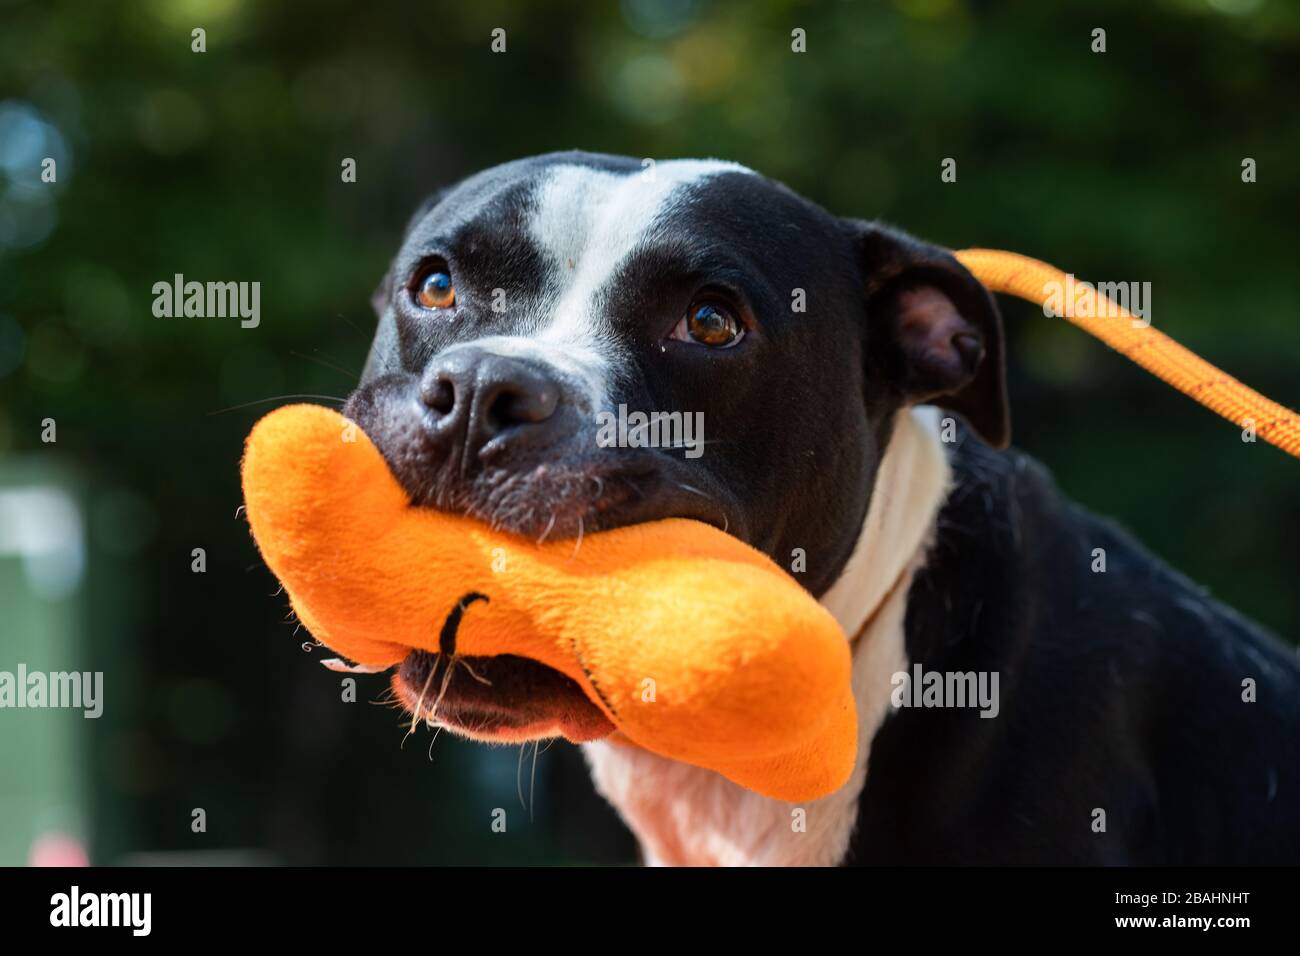 Black and White dog with an orange Toy in it's mouth Stock Photo